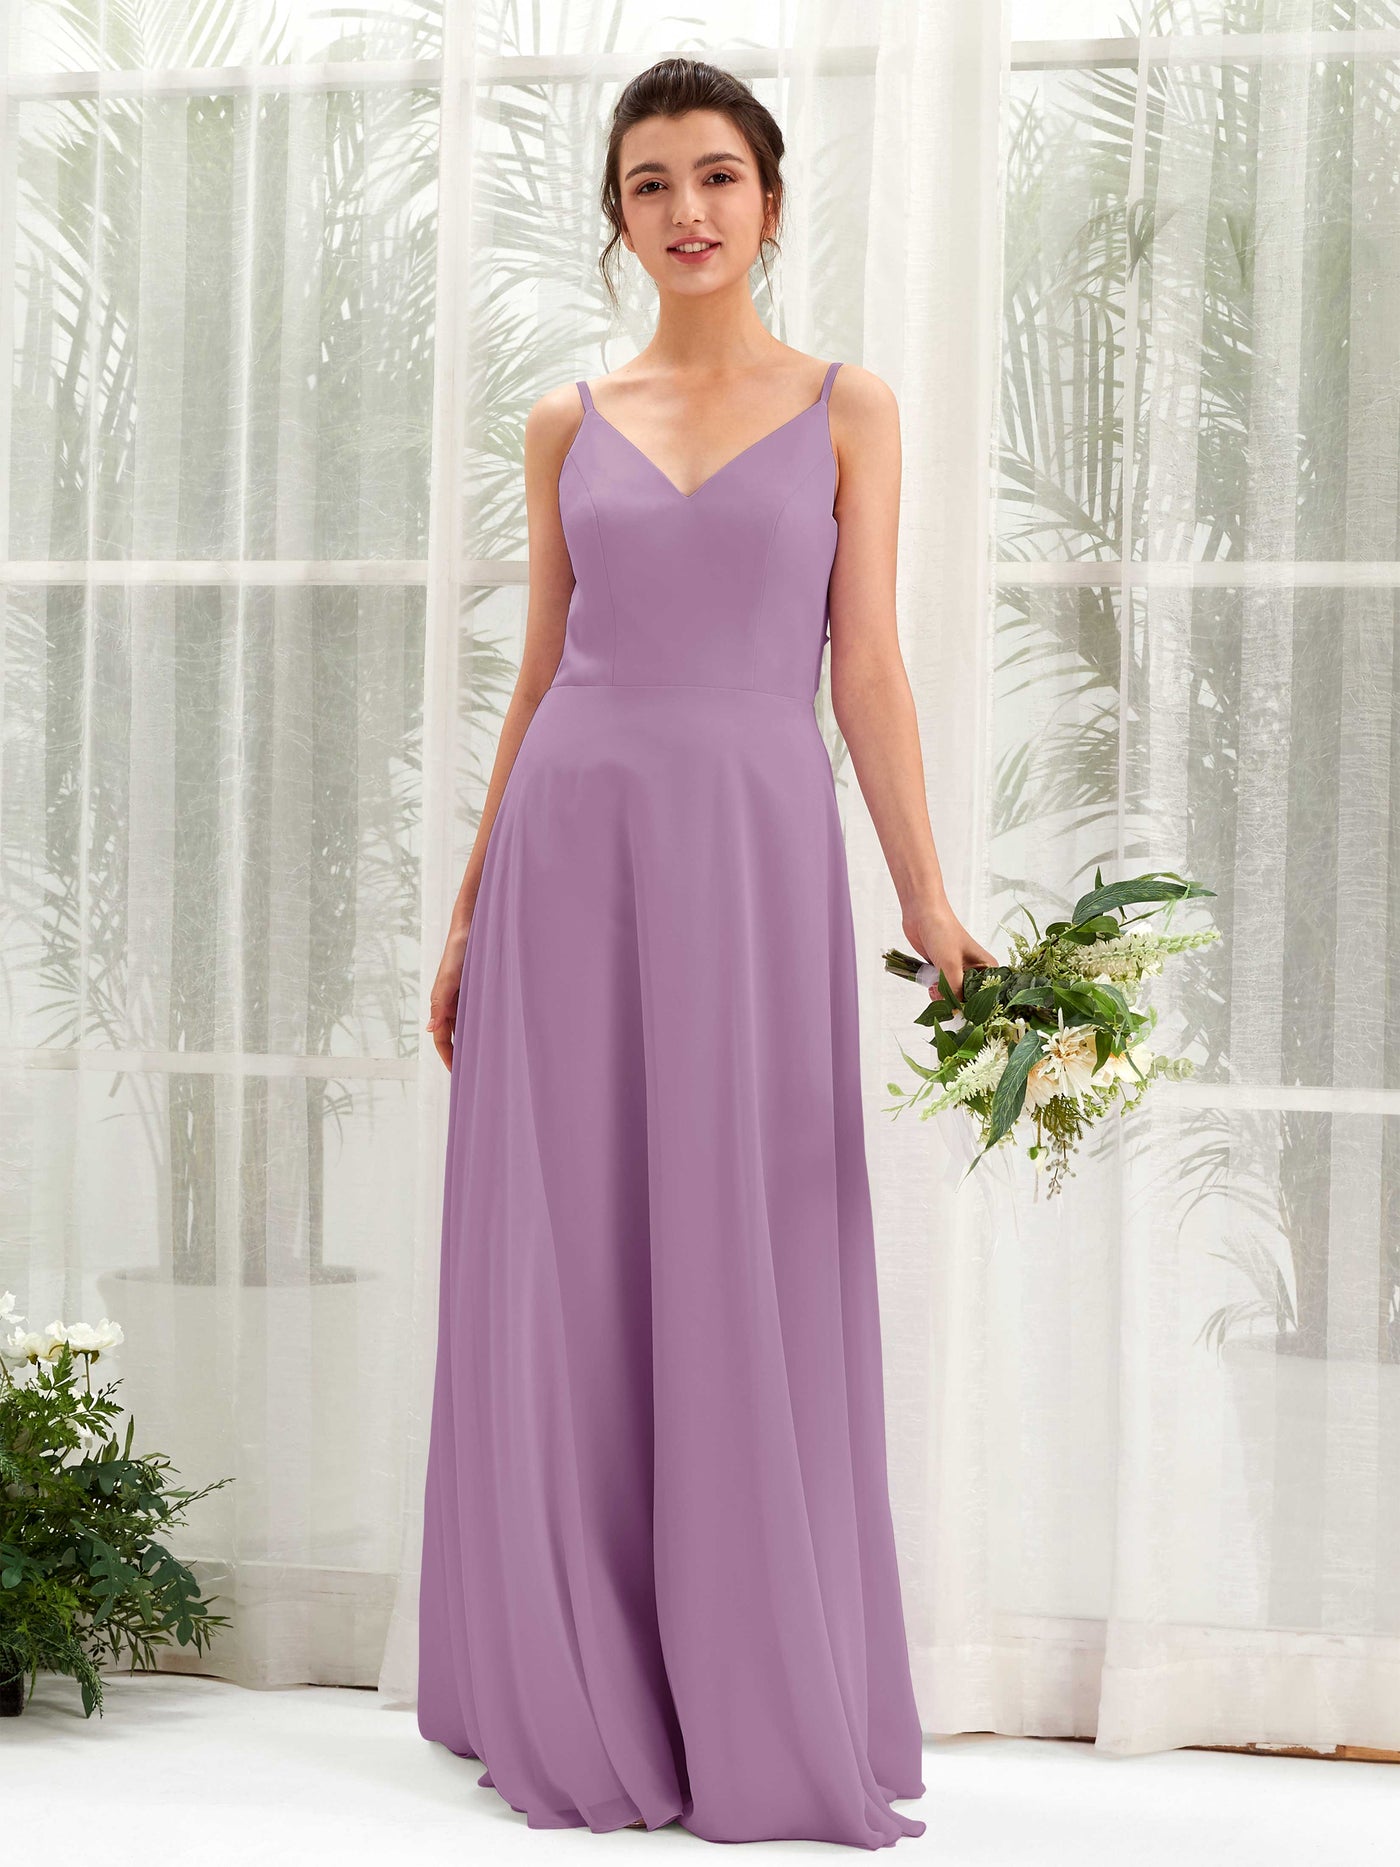 Orchid Mist Bridesmaid Dresses Bridesmaid Dress A-line Chiffon Spaghetti-straps Full Length Sleeveless Wedding Party Dress (81220621)#color_orchid-mist